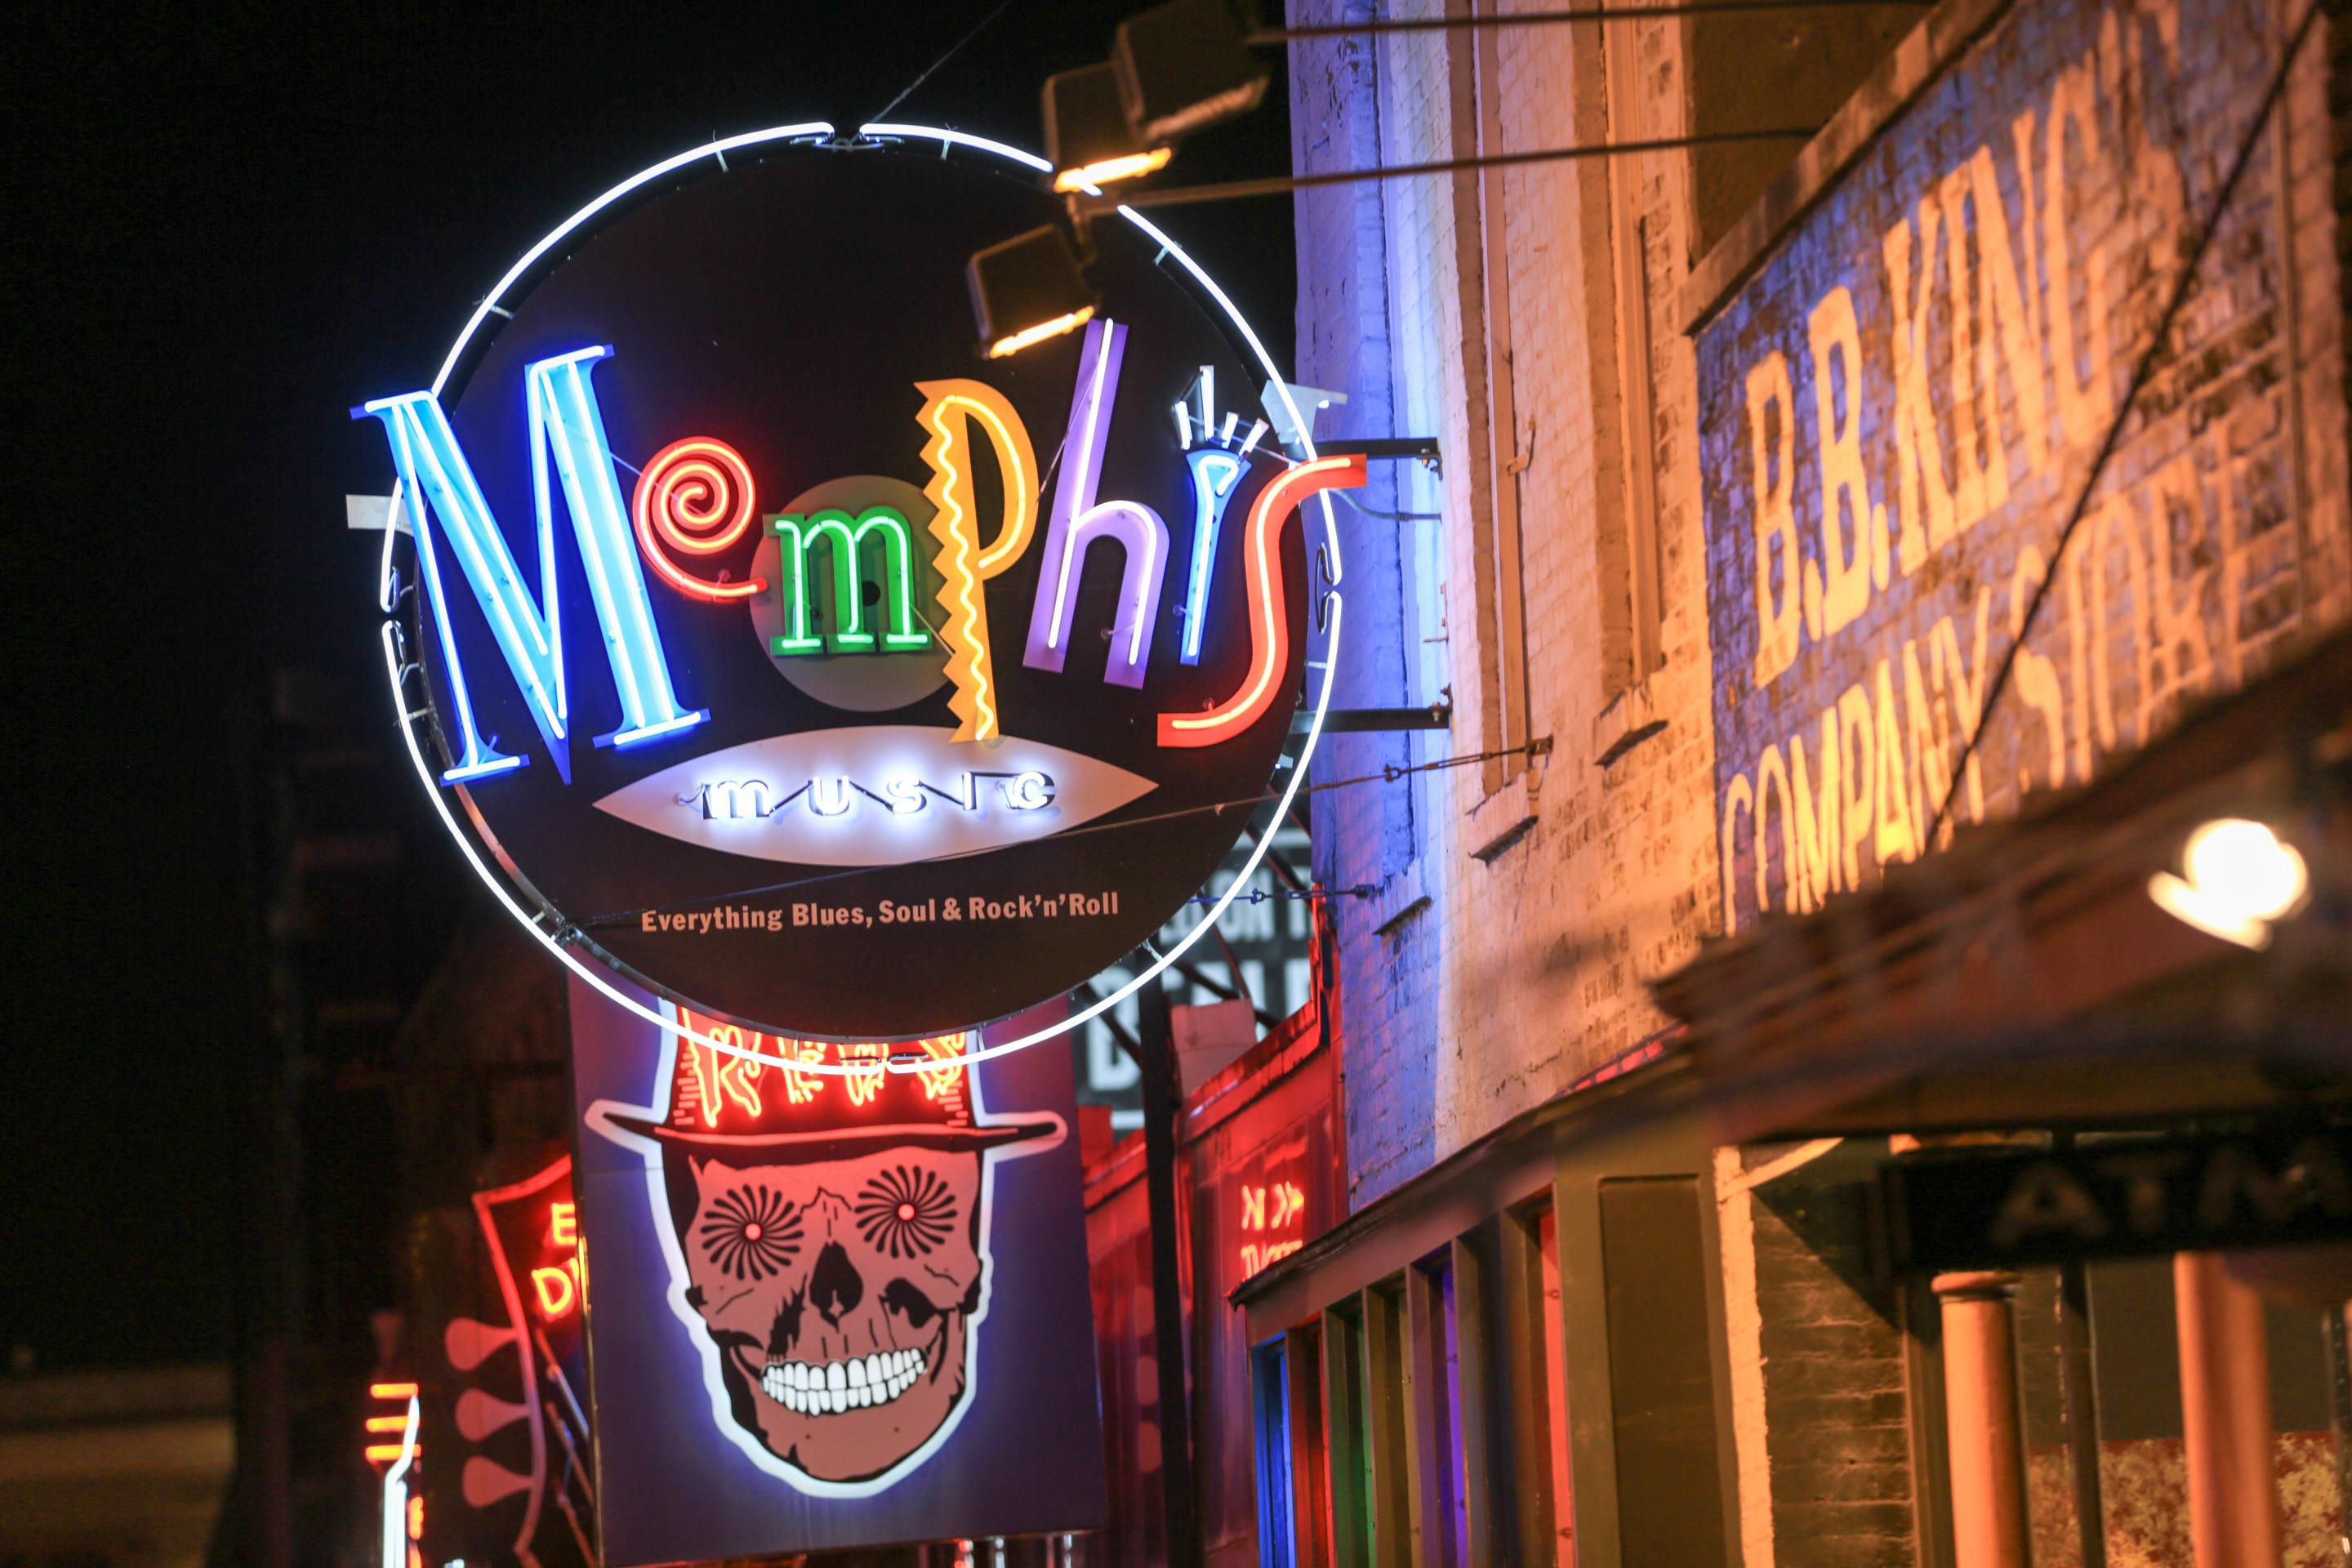 Spend the night on Beale Street and enjoy downtown Memphis